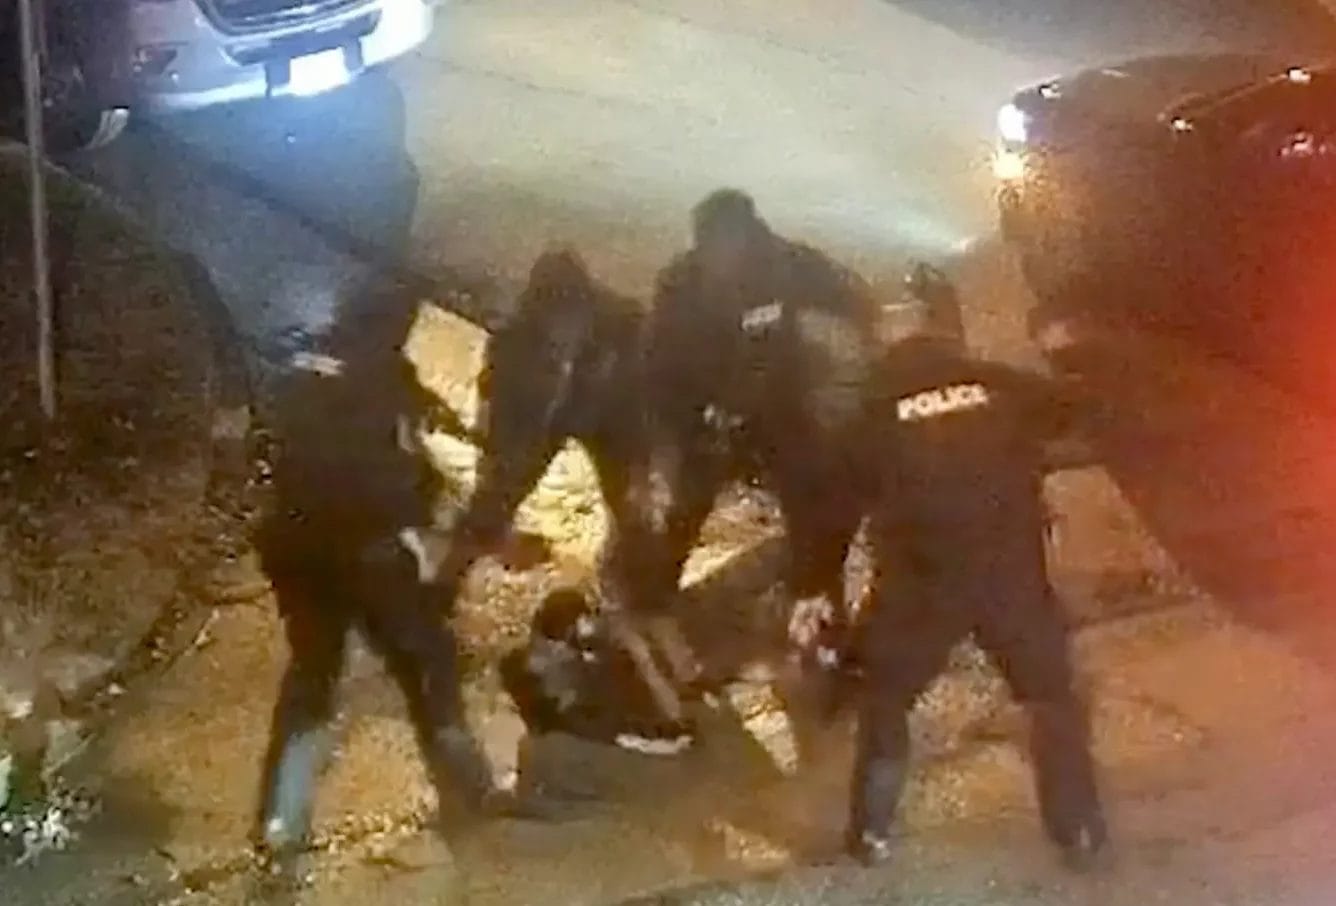 Tyre Nichols being beaten by police